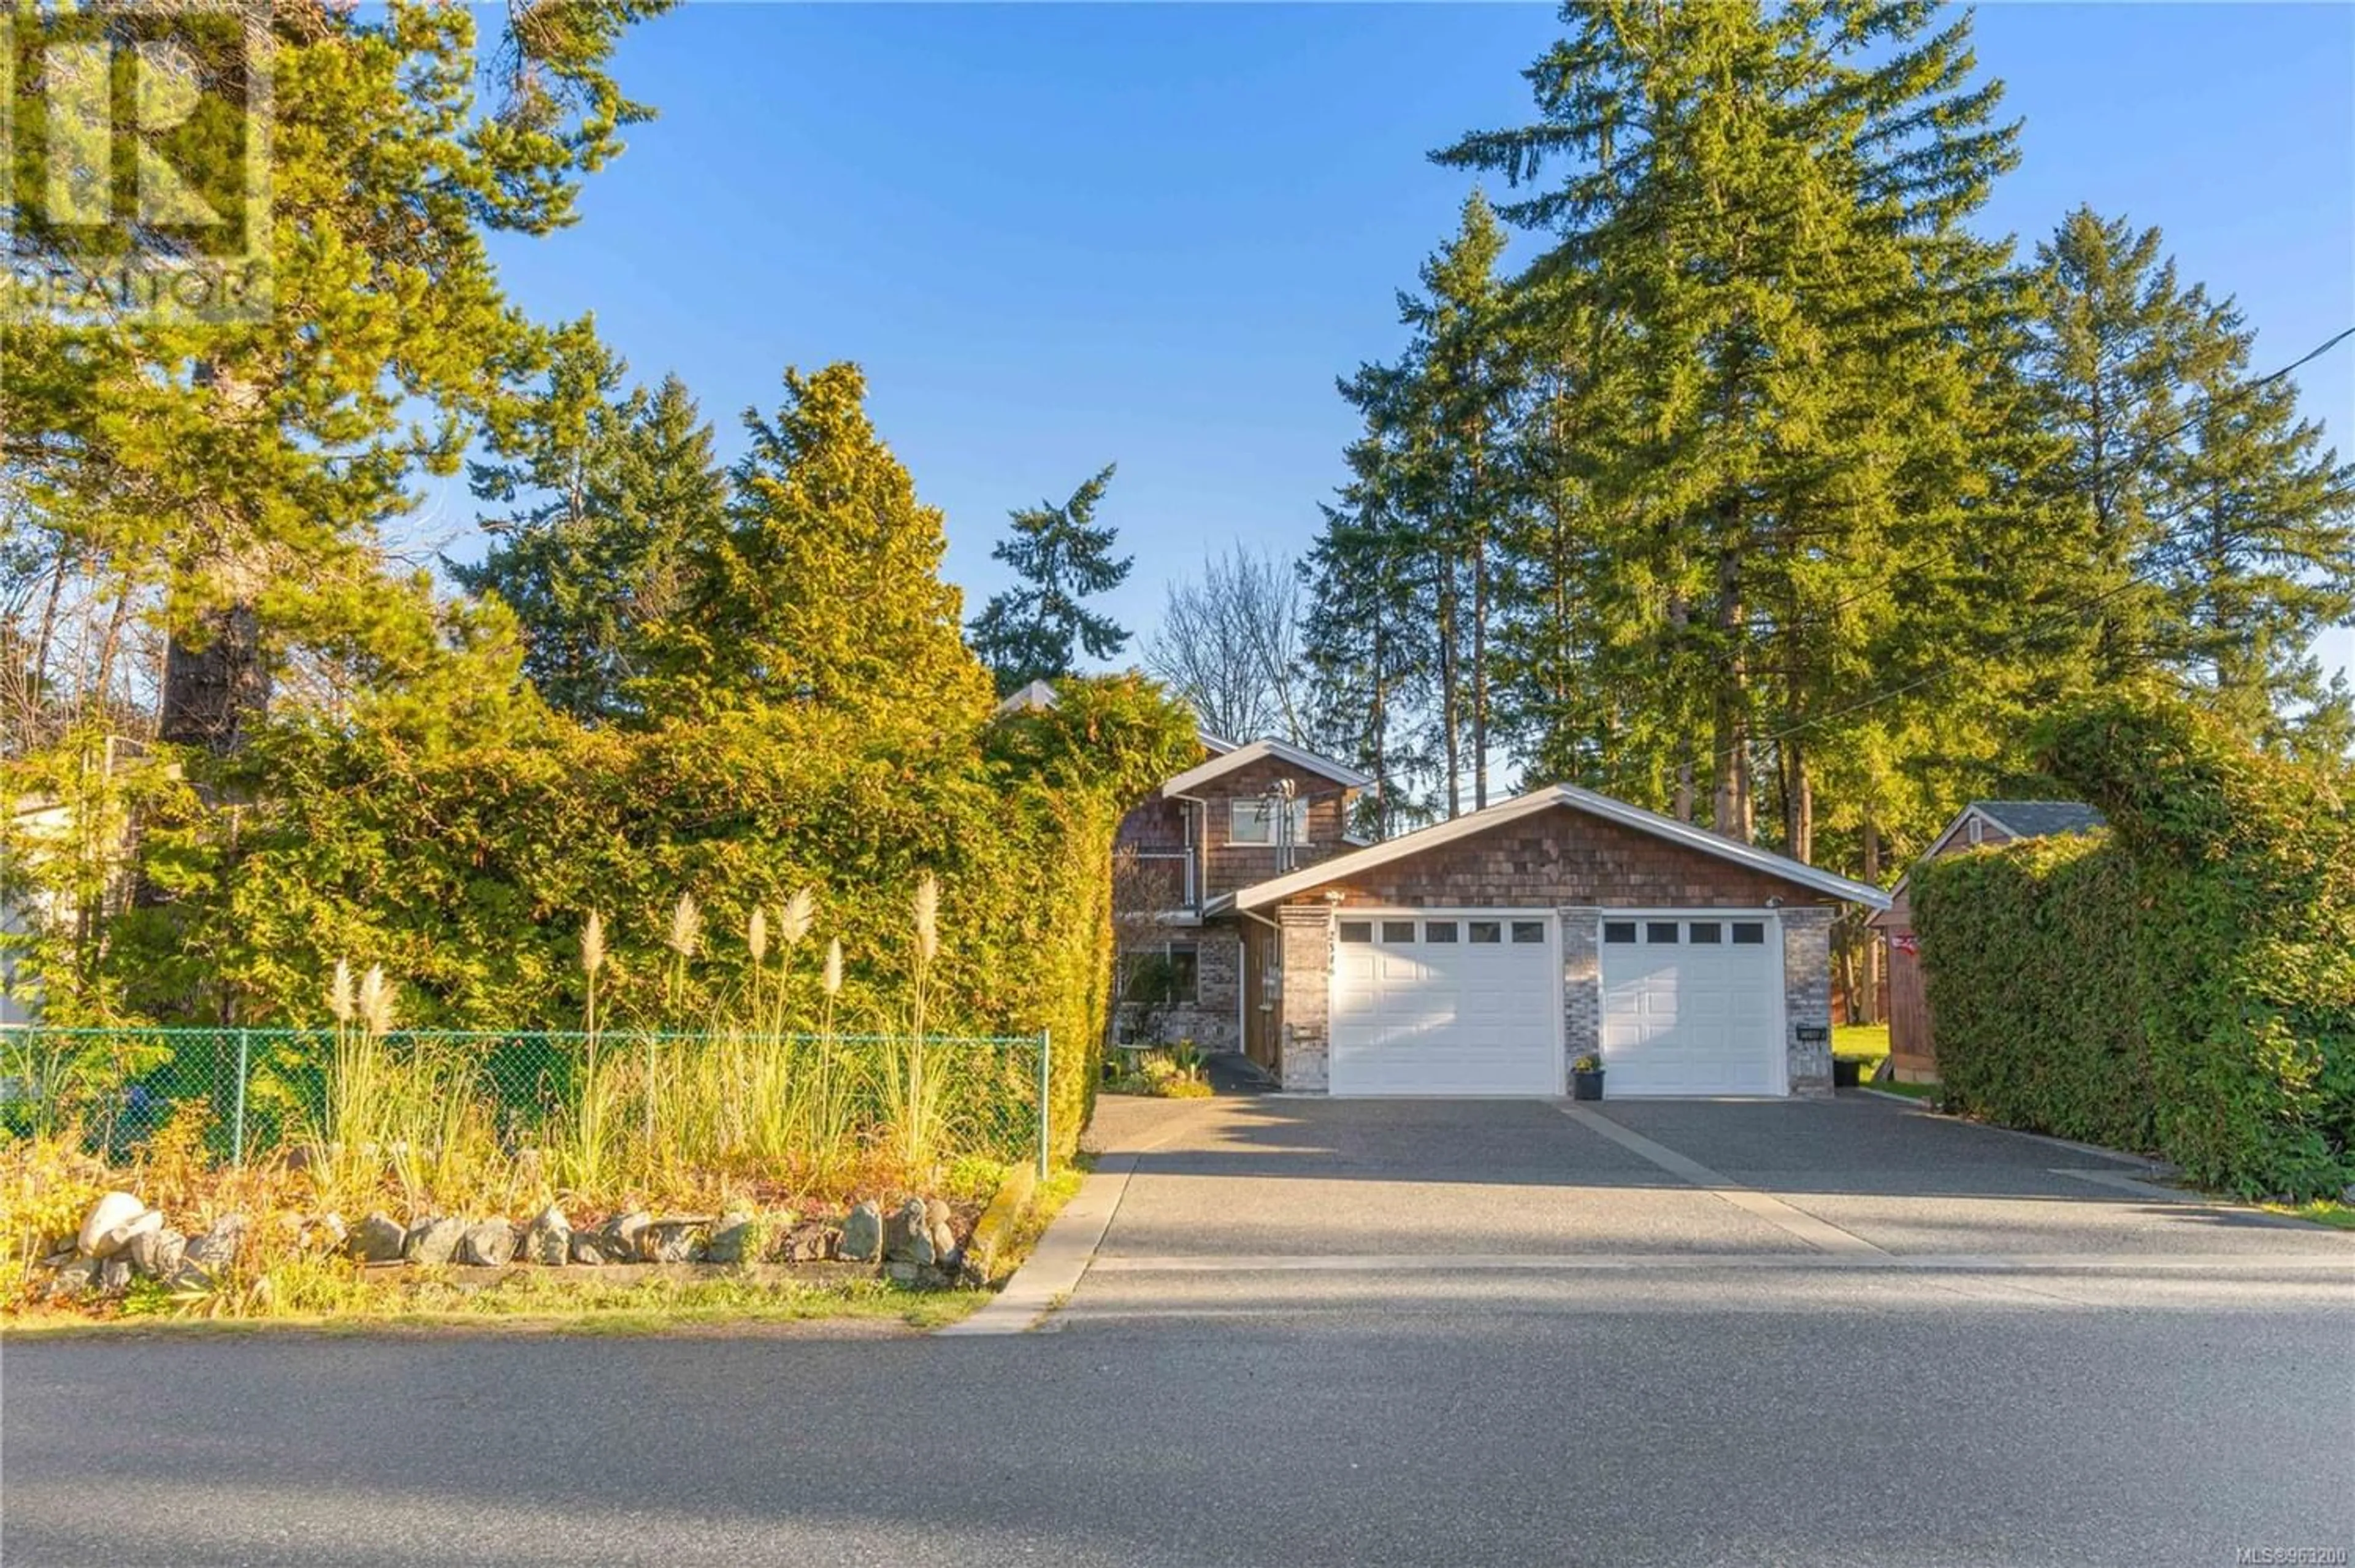 Frontside or backside of a home for 2346 Wild Dove Rd, Nanaimo British Columbia V9T3T1